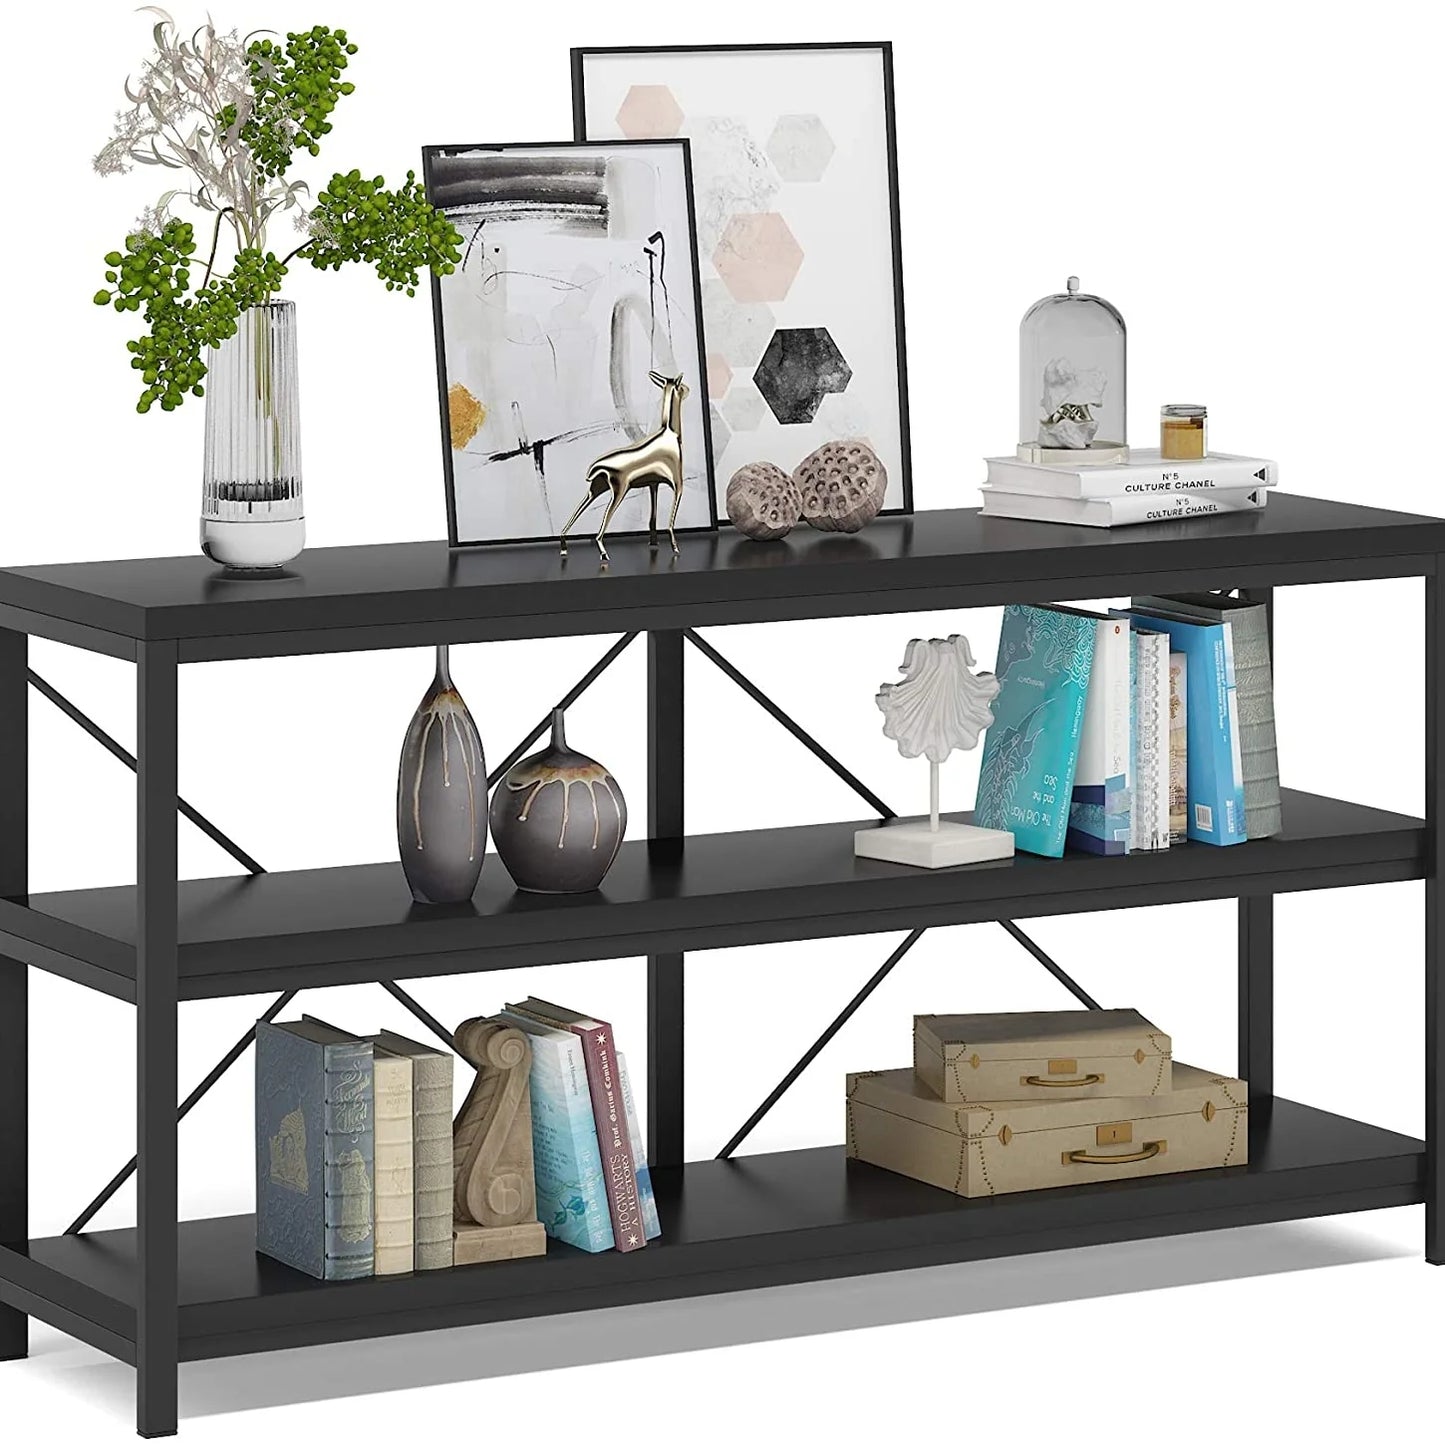 Tribesigns Console Table, 55" Sofa Table TV Stand with 3-Tier Storage Shelves